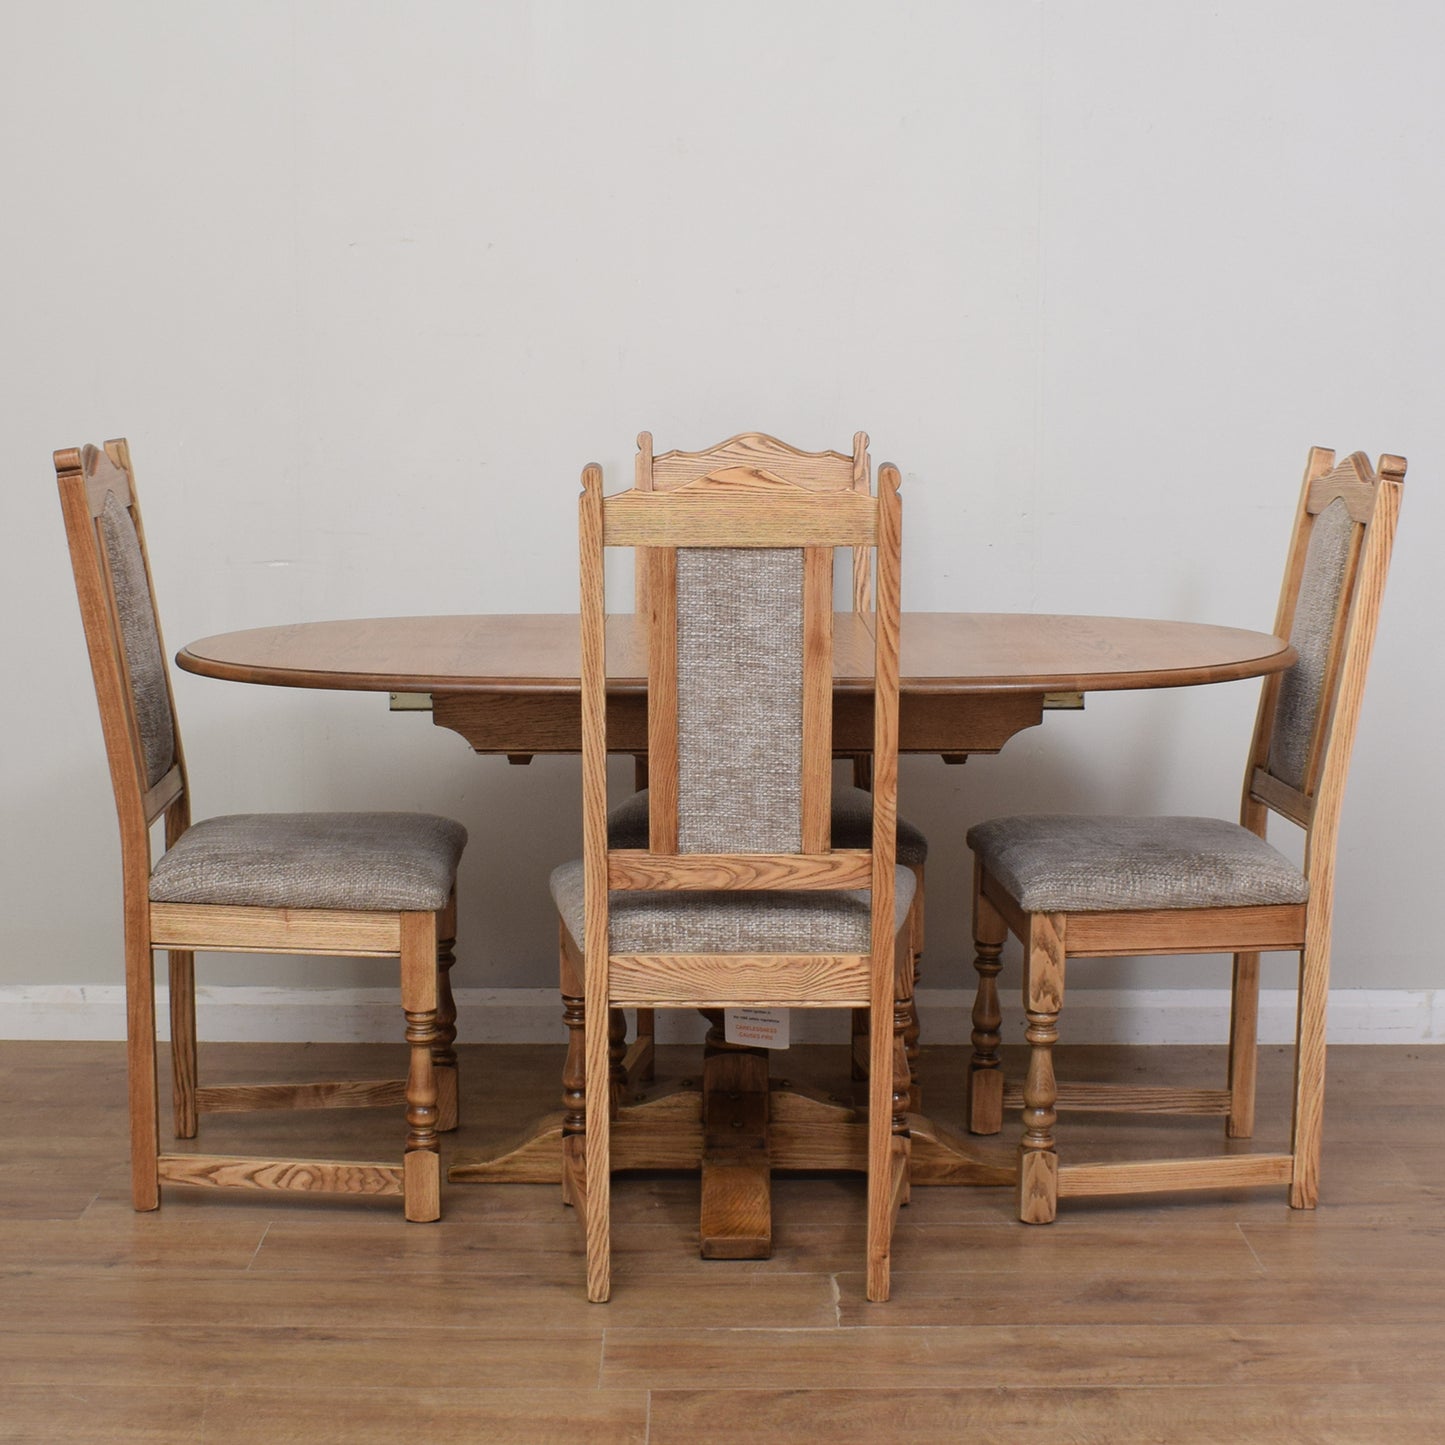 Restored Old Charm Table And Four Chairs